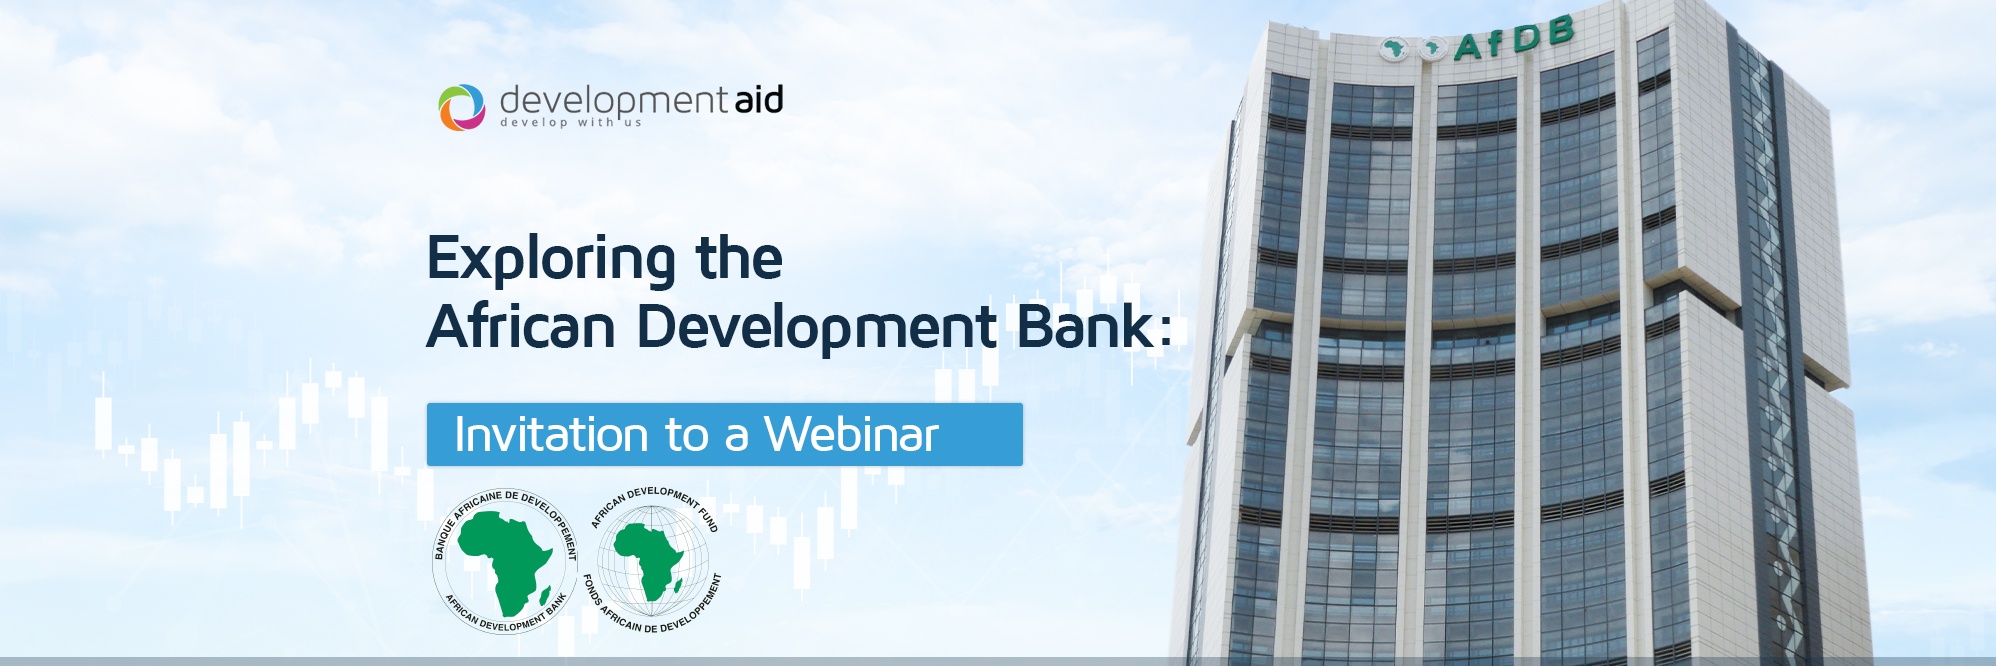 Exploring the African Development Bank: Invitation to a Webinar